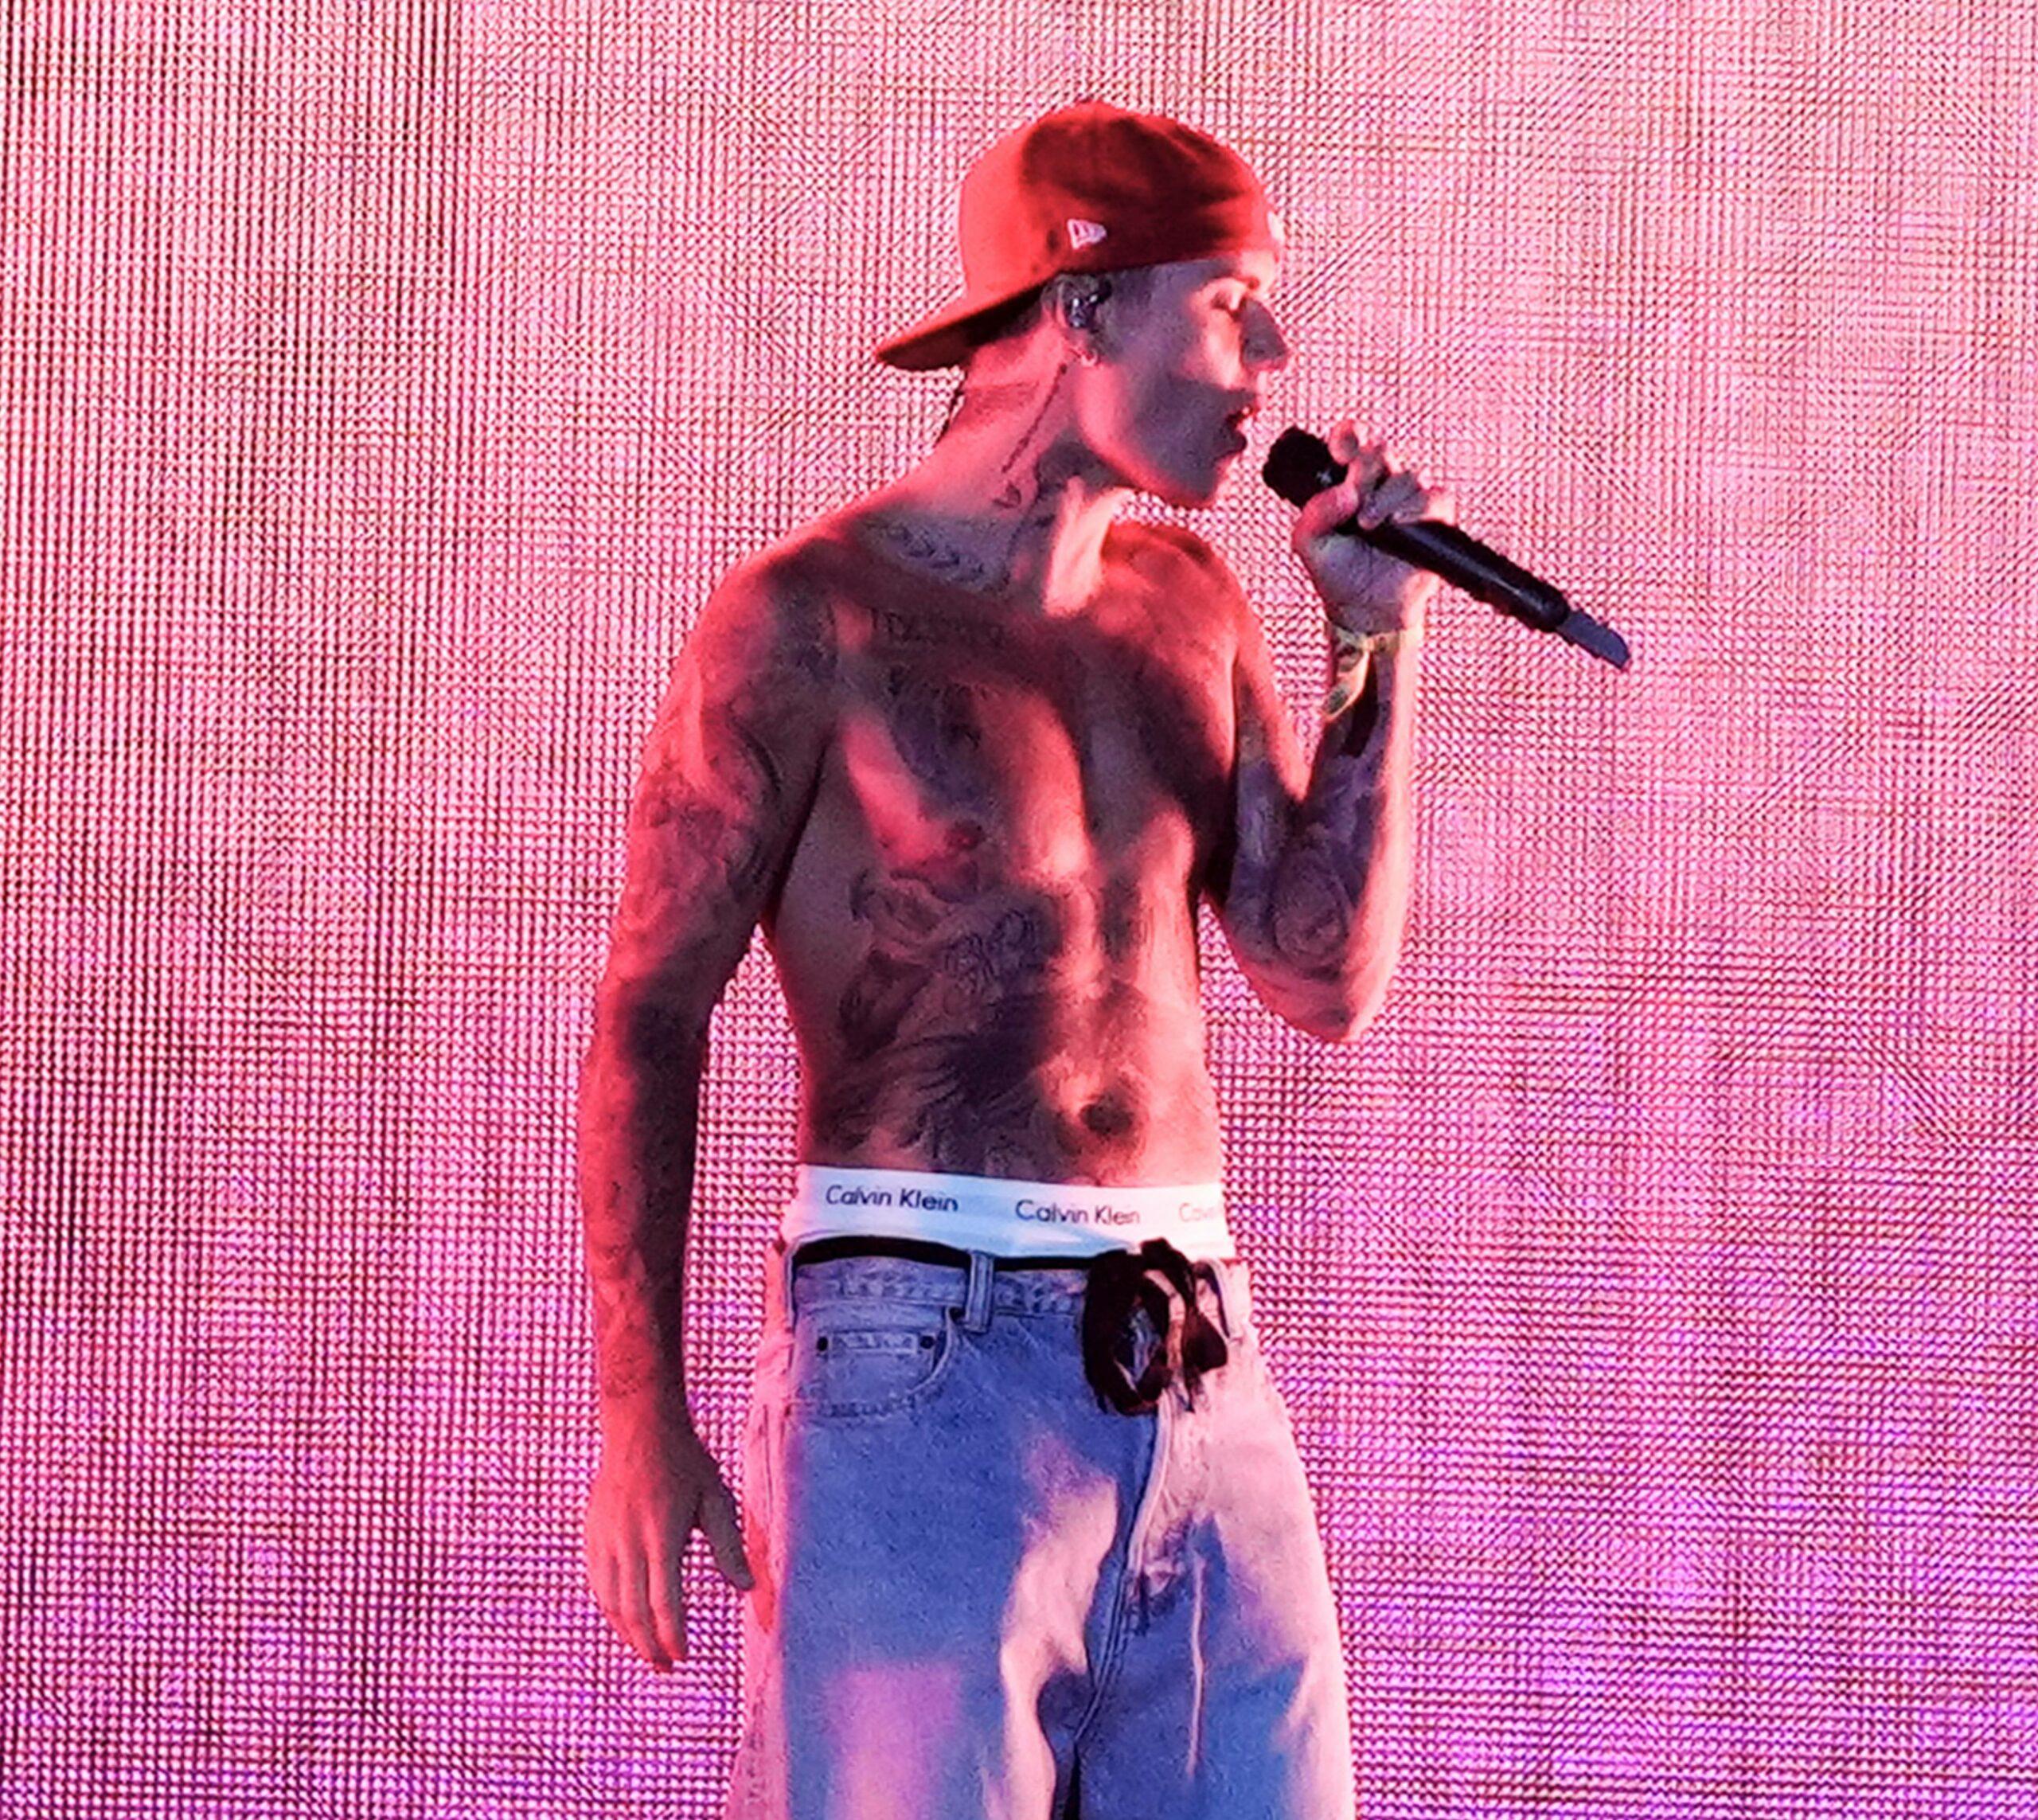 Justin Bieber goes shirtless performing with Justin Ceasar at Coachella Music Festival in Indio, CA